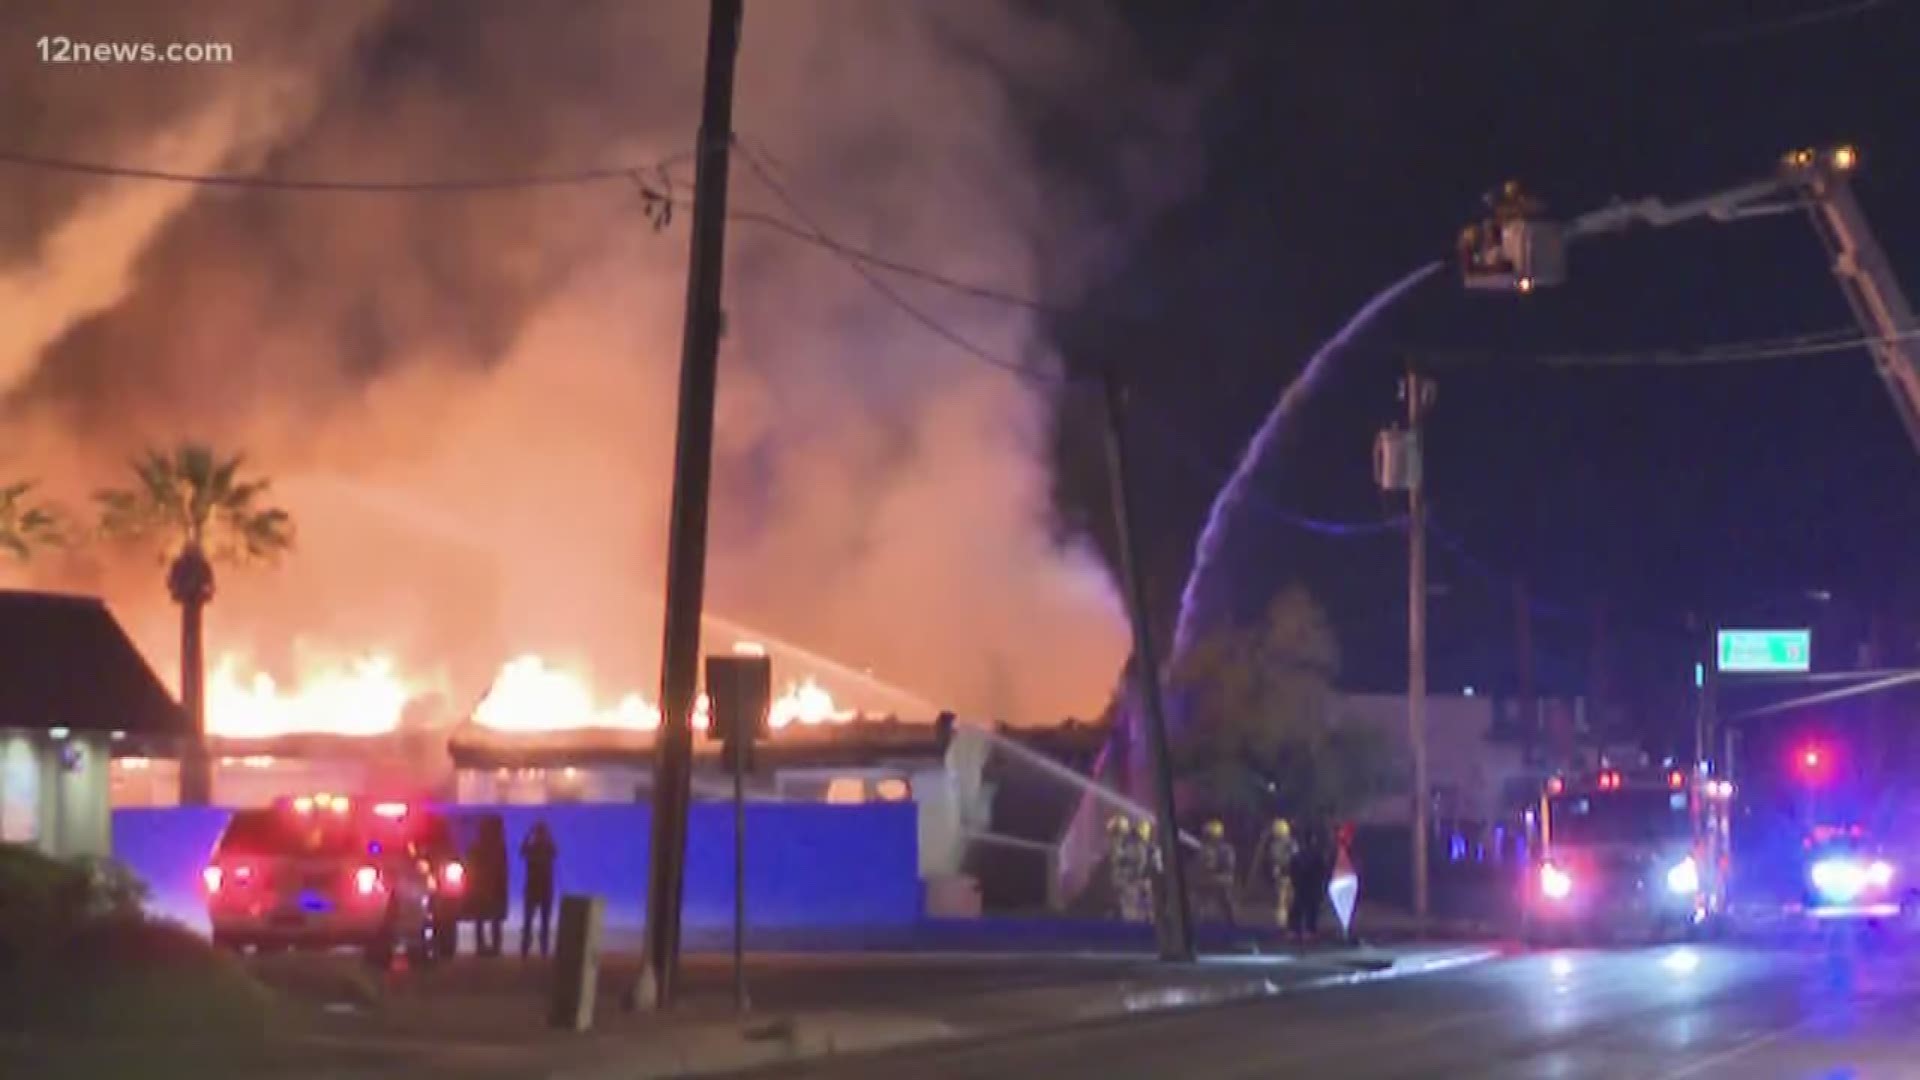 The fire was burning in a structure near 12th Street and Indian School Road, Phoenix FD said.